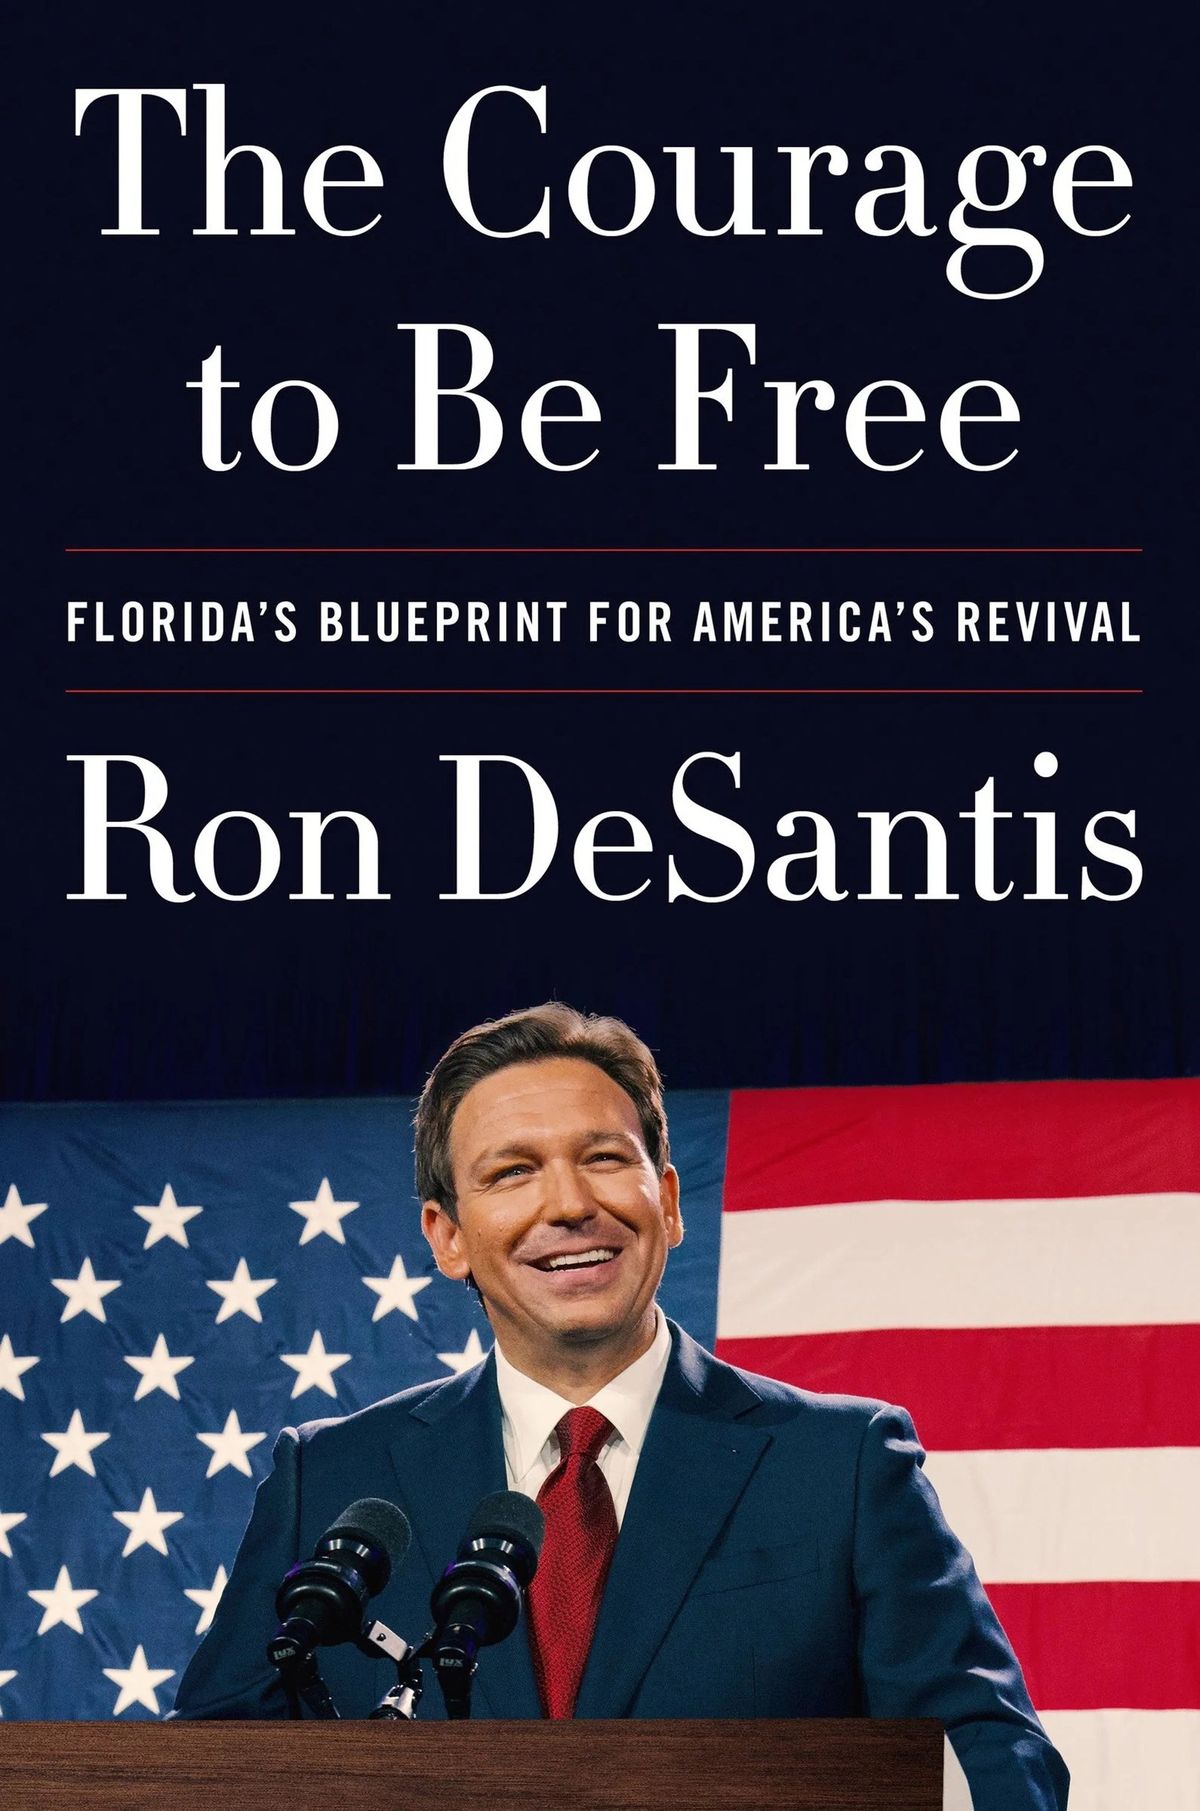 "The Courage to Be Free: Florida